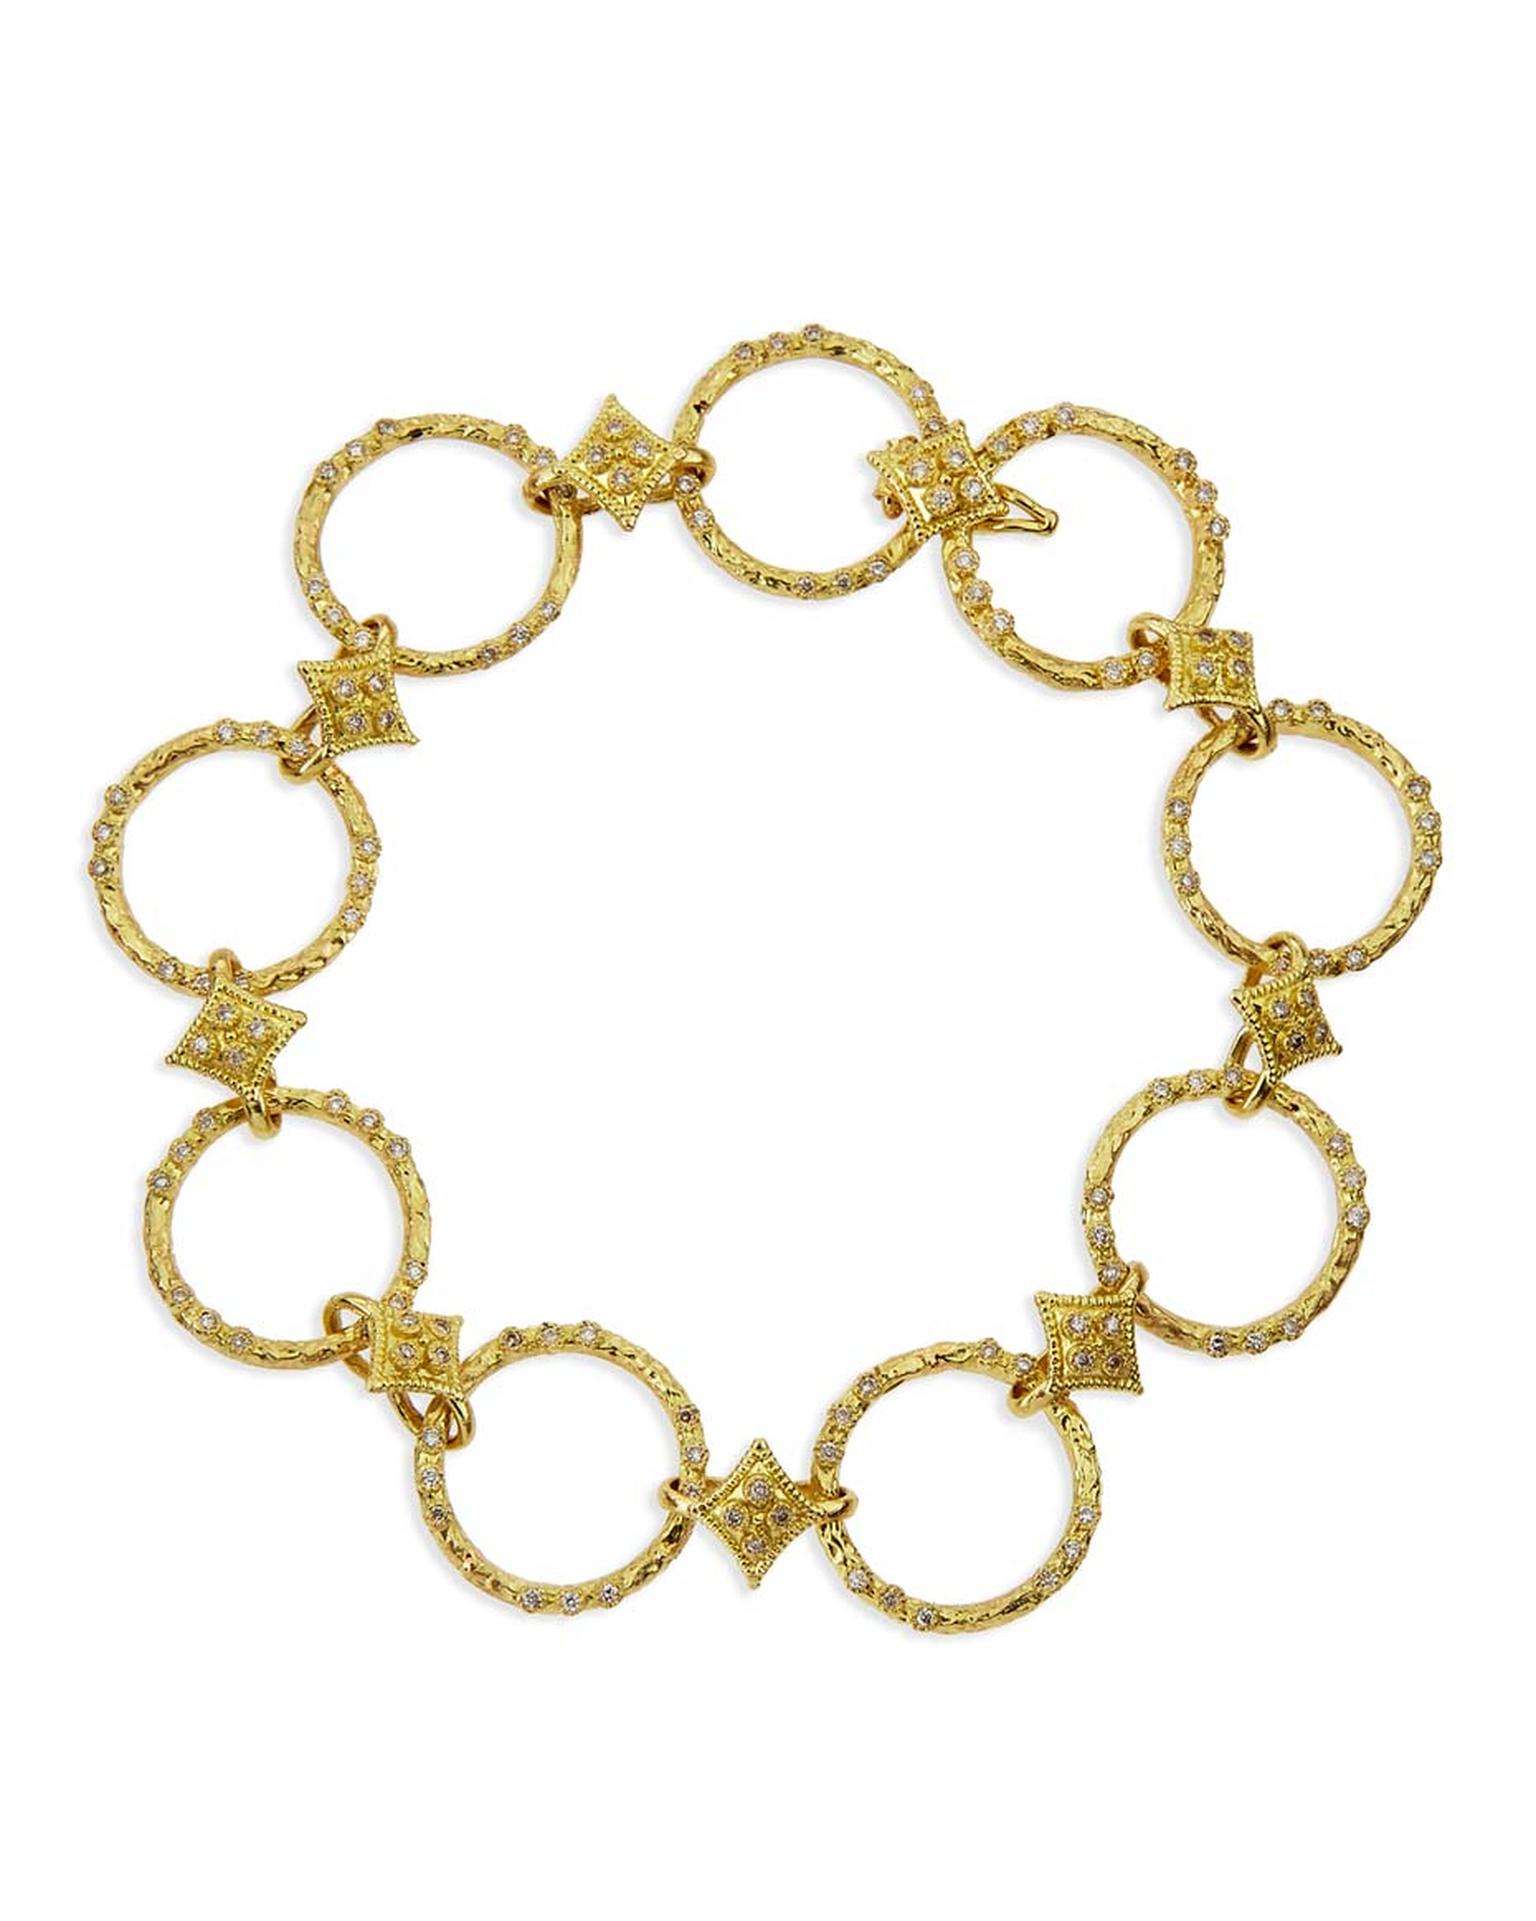 Armenta yellow gold bracelet with textured circle links and quatrefoil stations with pavé white diamonds. Available from Bergdorf Goodman ($4,790).